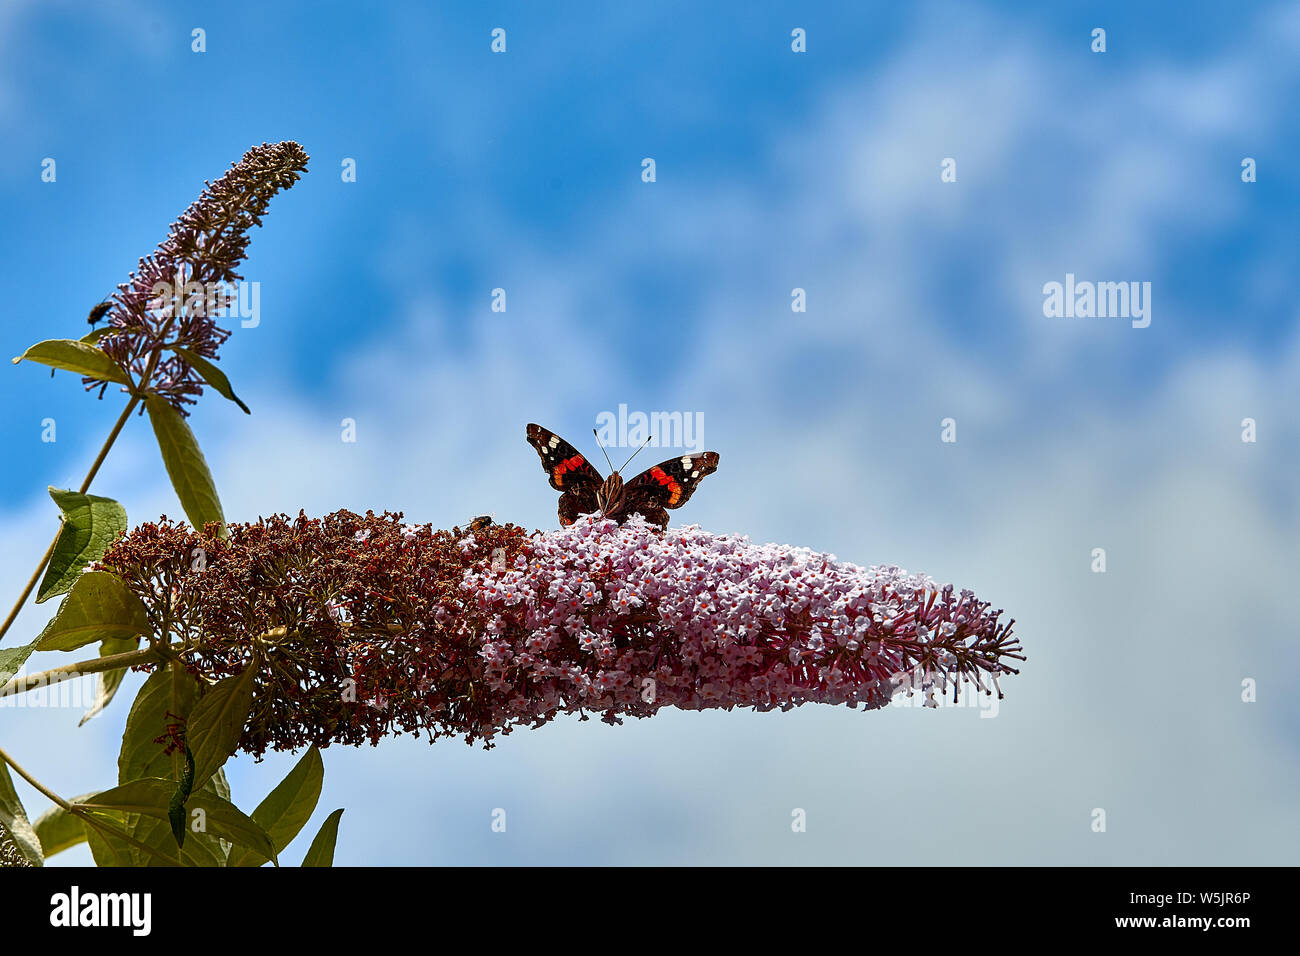 A Red Admiral butterfly (Vanessa atalanta) feeding on a buddleia bush, showing a close-up of the proboscis protruding from the mouth. Stock Photo